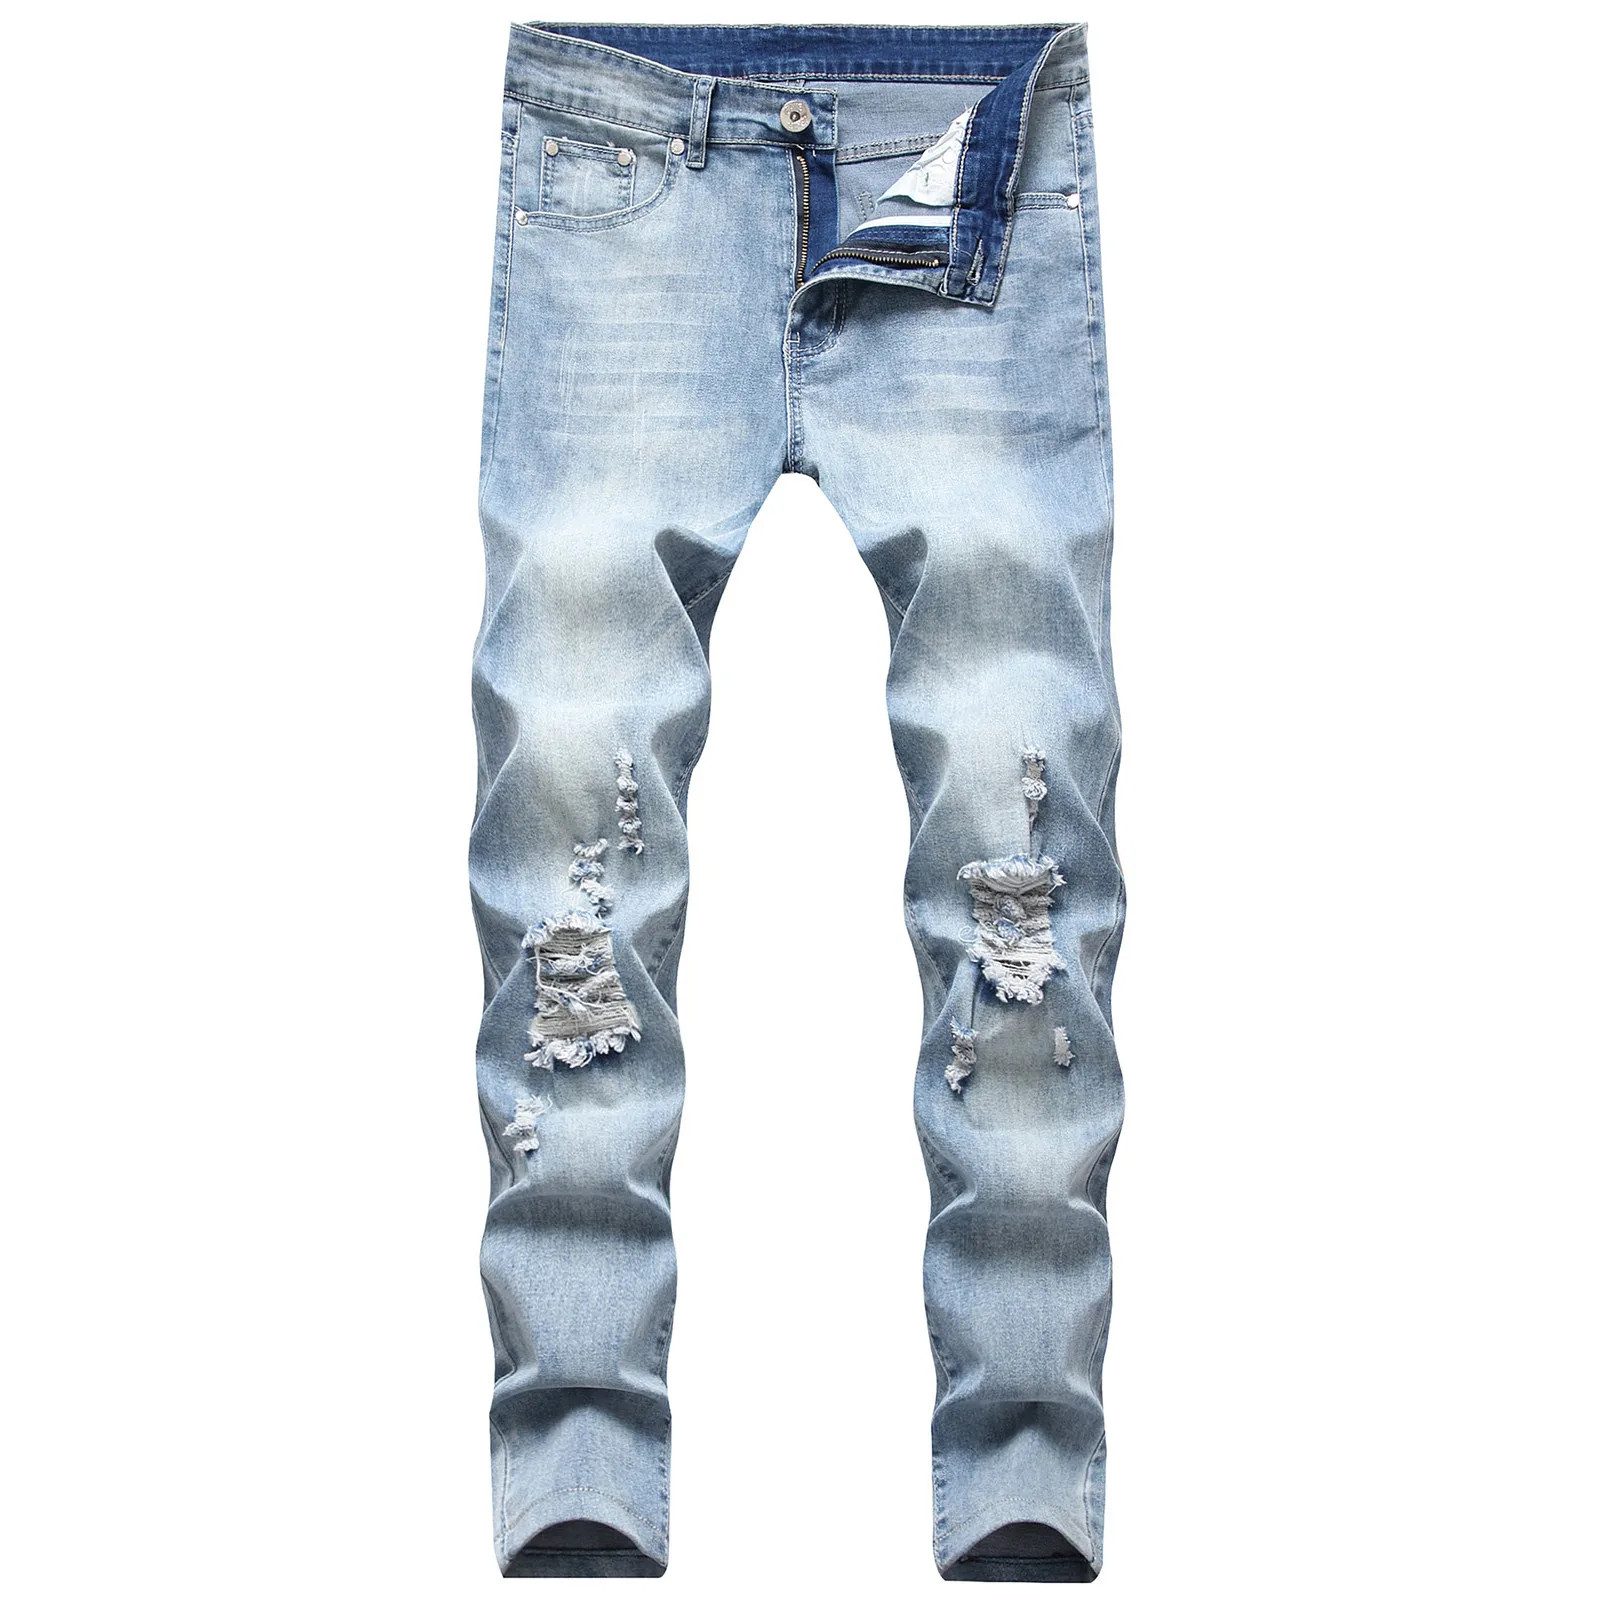 

2021 Men's Jeans Cool Skinny Ripped Hole Slim Denim Trousers Fold Wash Work Frayed Hip Hop Vintage Casual Pencil Pants For Men